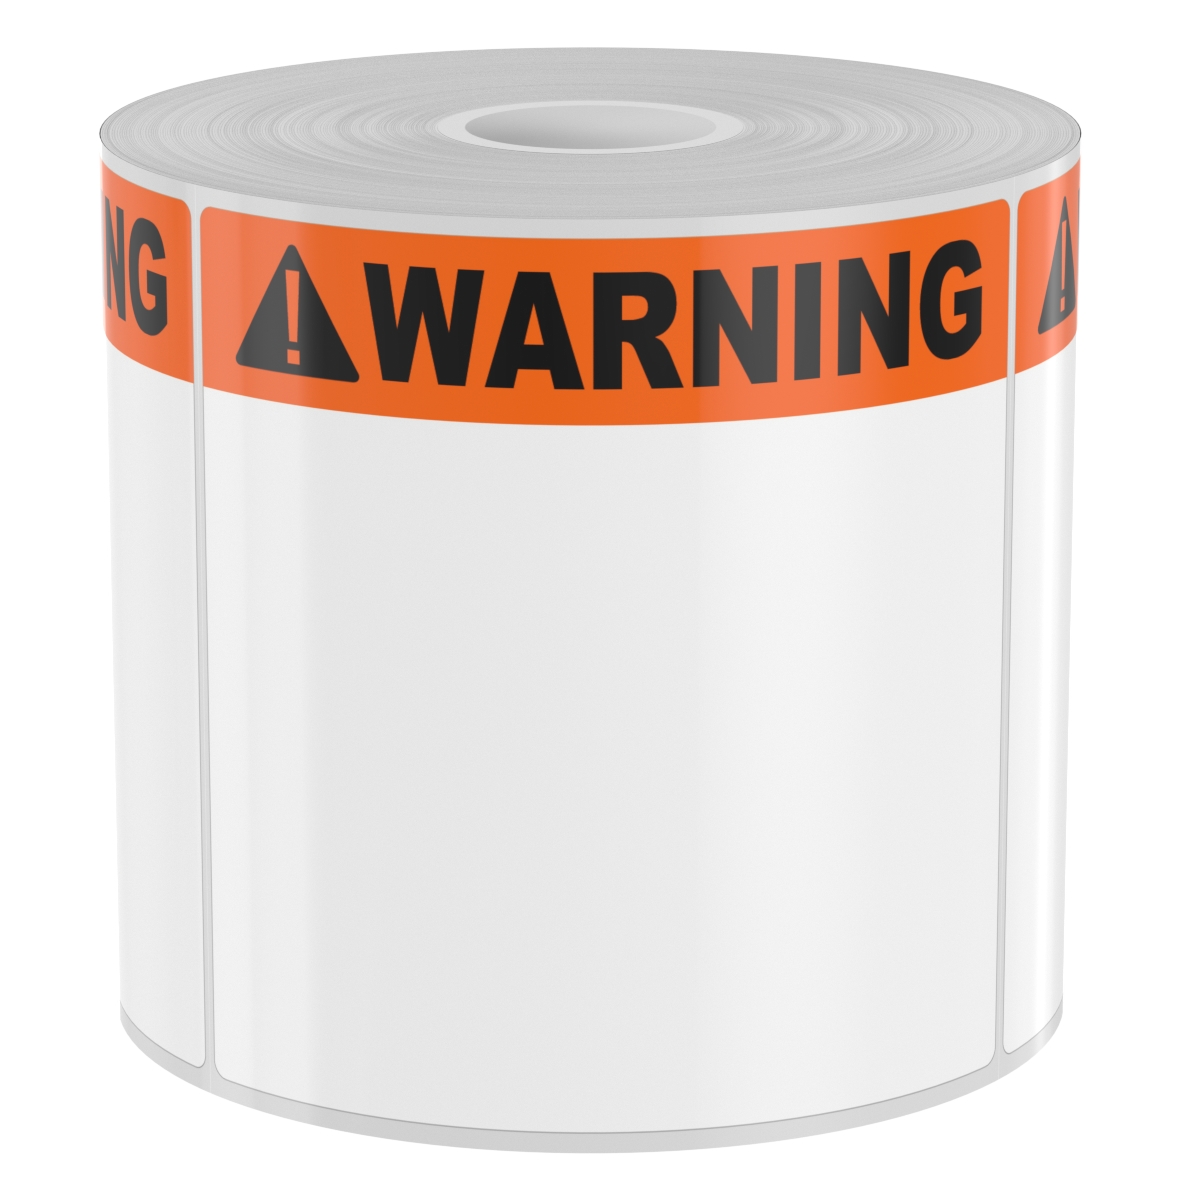 Ask a question about 250 4" x 4" High-Performance Orange Band with Black Warning